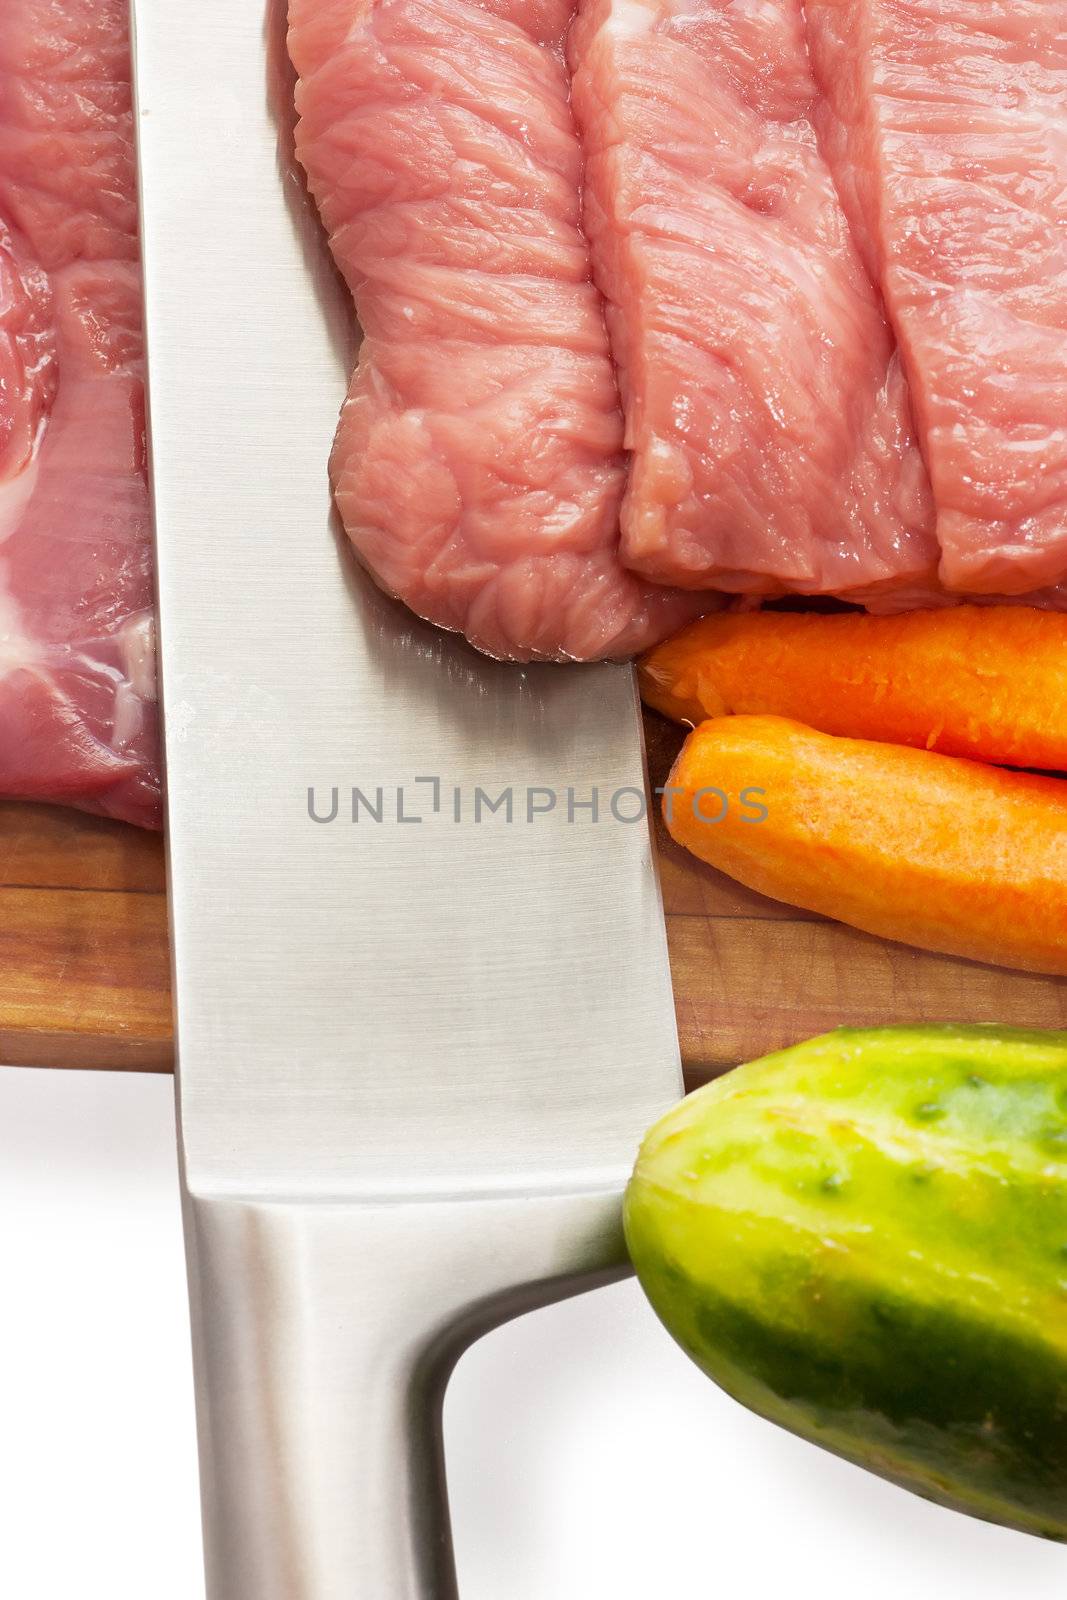 Unprepared cutted meat and vegetables.